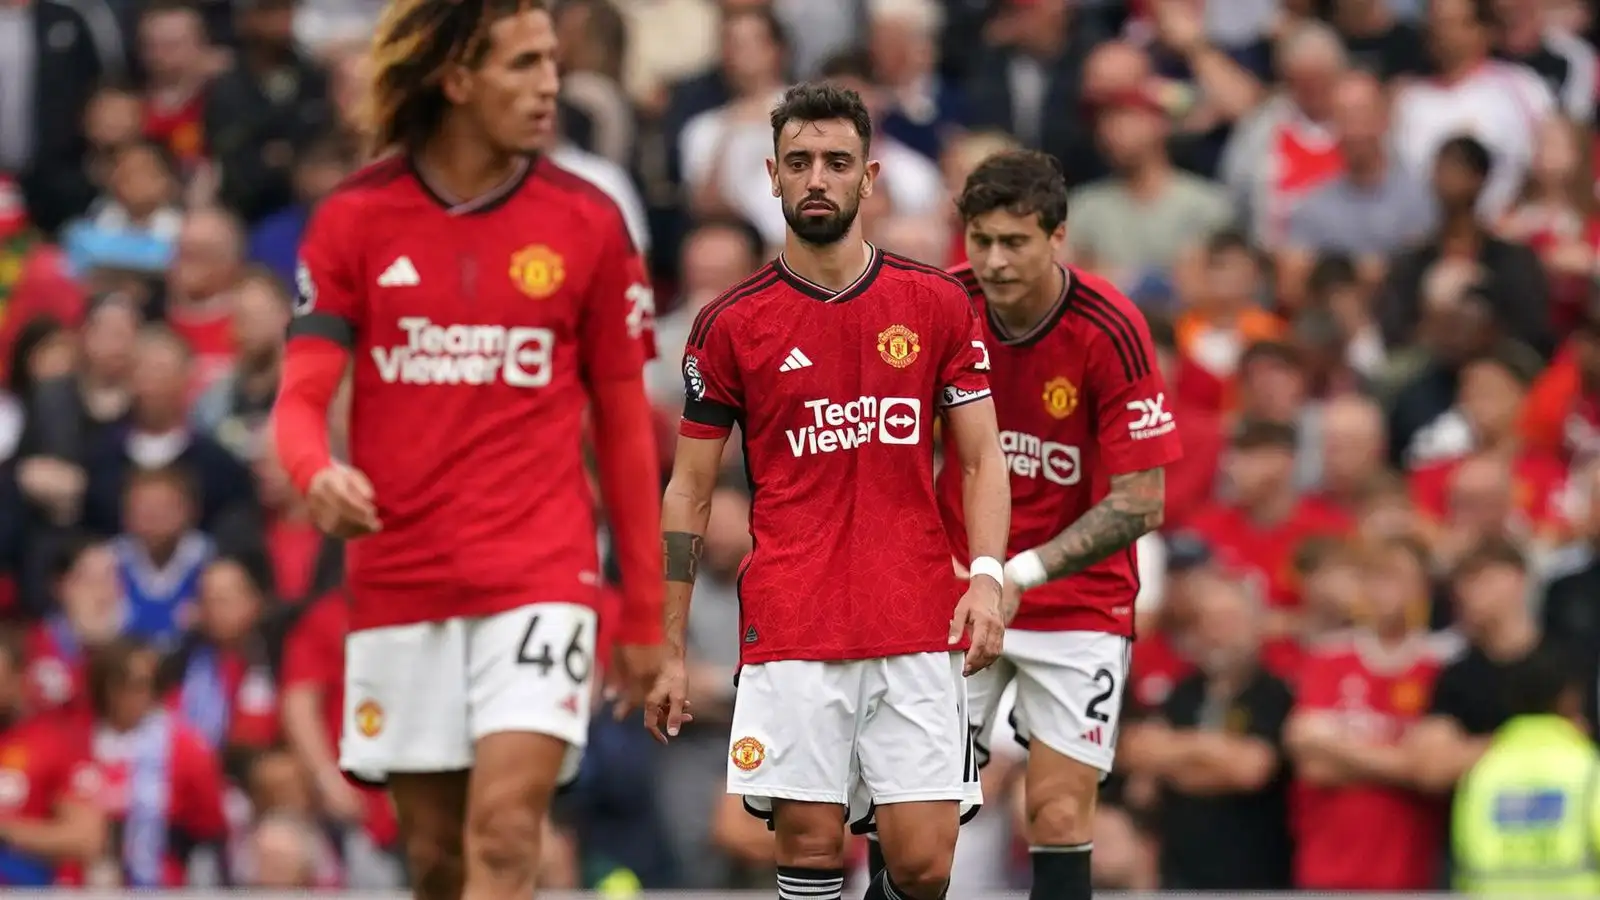 Manchester United midfielder Bruno Fernandes looks dejected after conceding a goal.